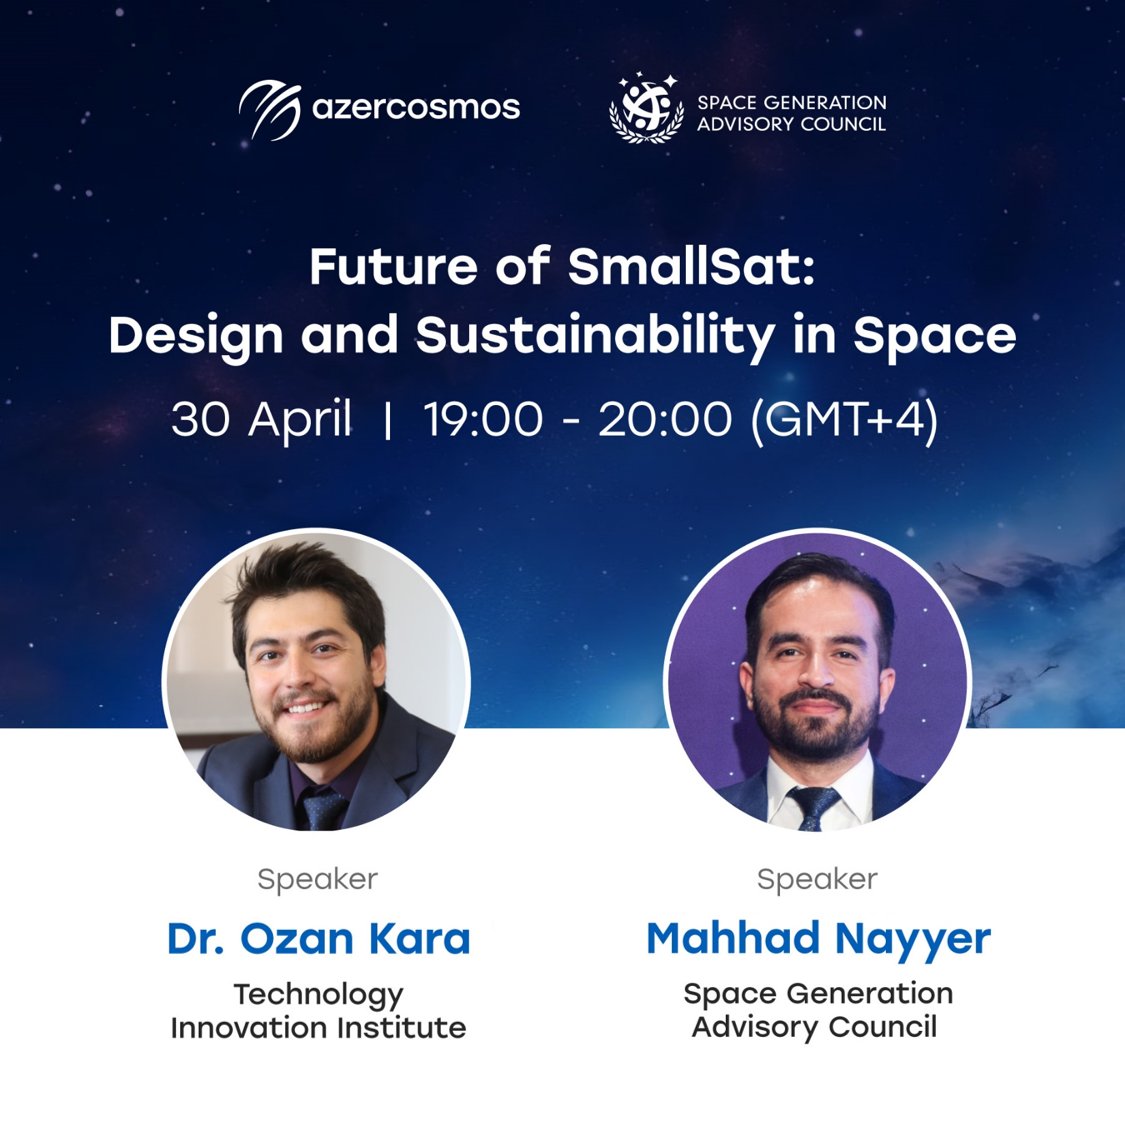 Join us on April 30th for a immersive webinar on the “Future of SmallSat: Design and Sustainability in Space”! Learn about the latest advancements and challenges in satellite technology while engaging in insightful discussions with industry experts. Don’t miss out!